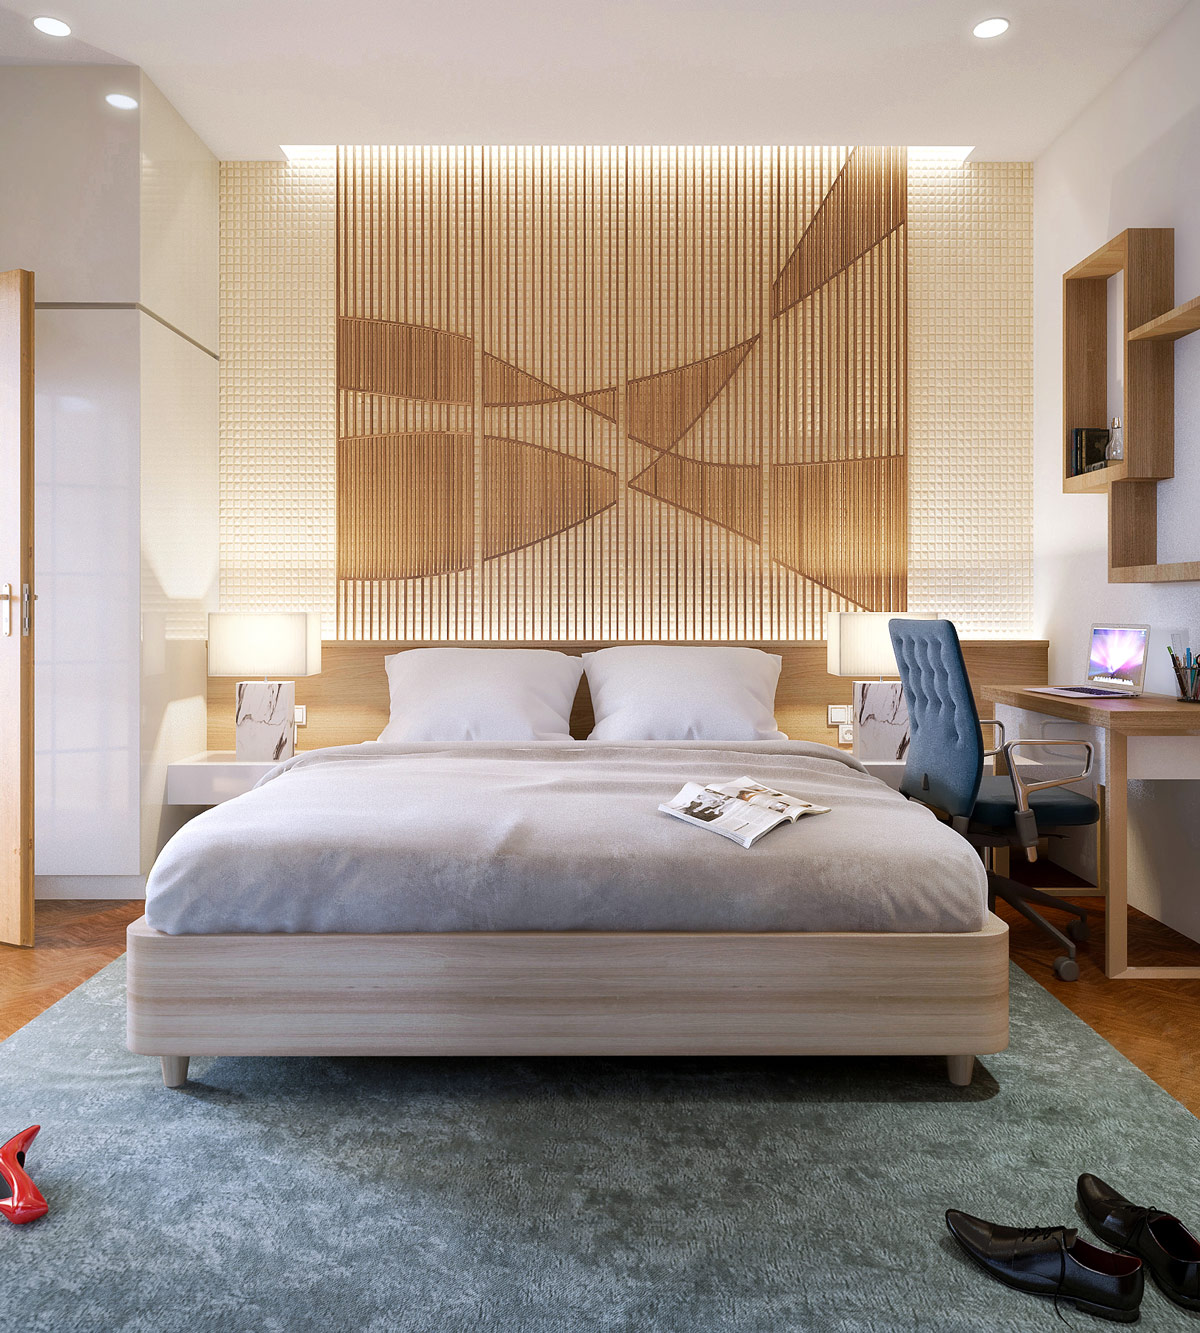 25 Beautiful Examples Of Bedroom Accent Walls That Use